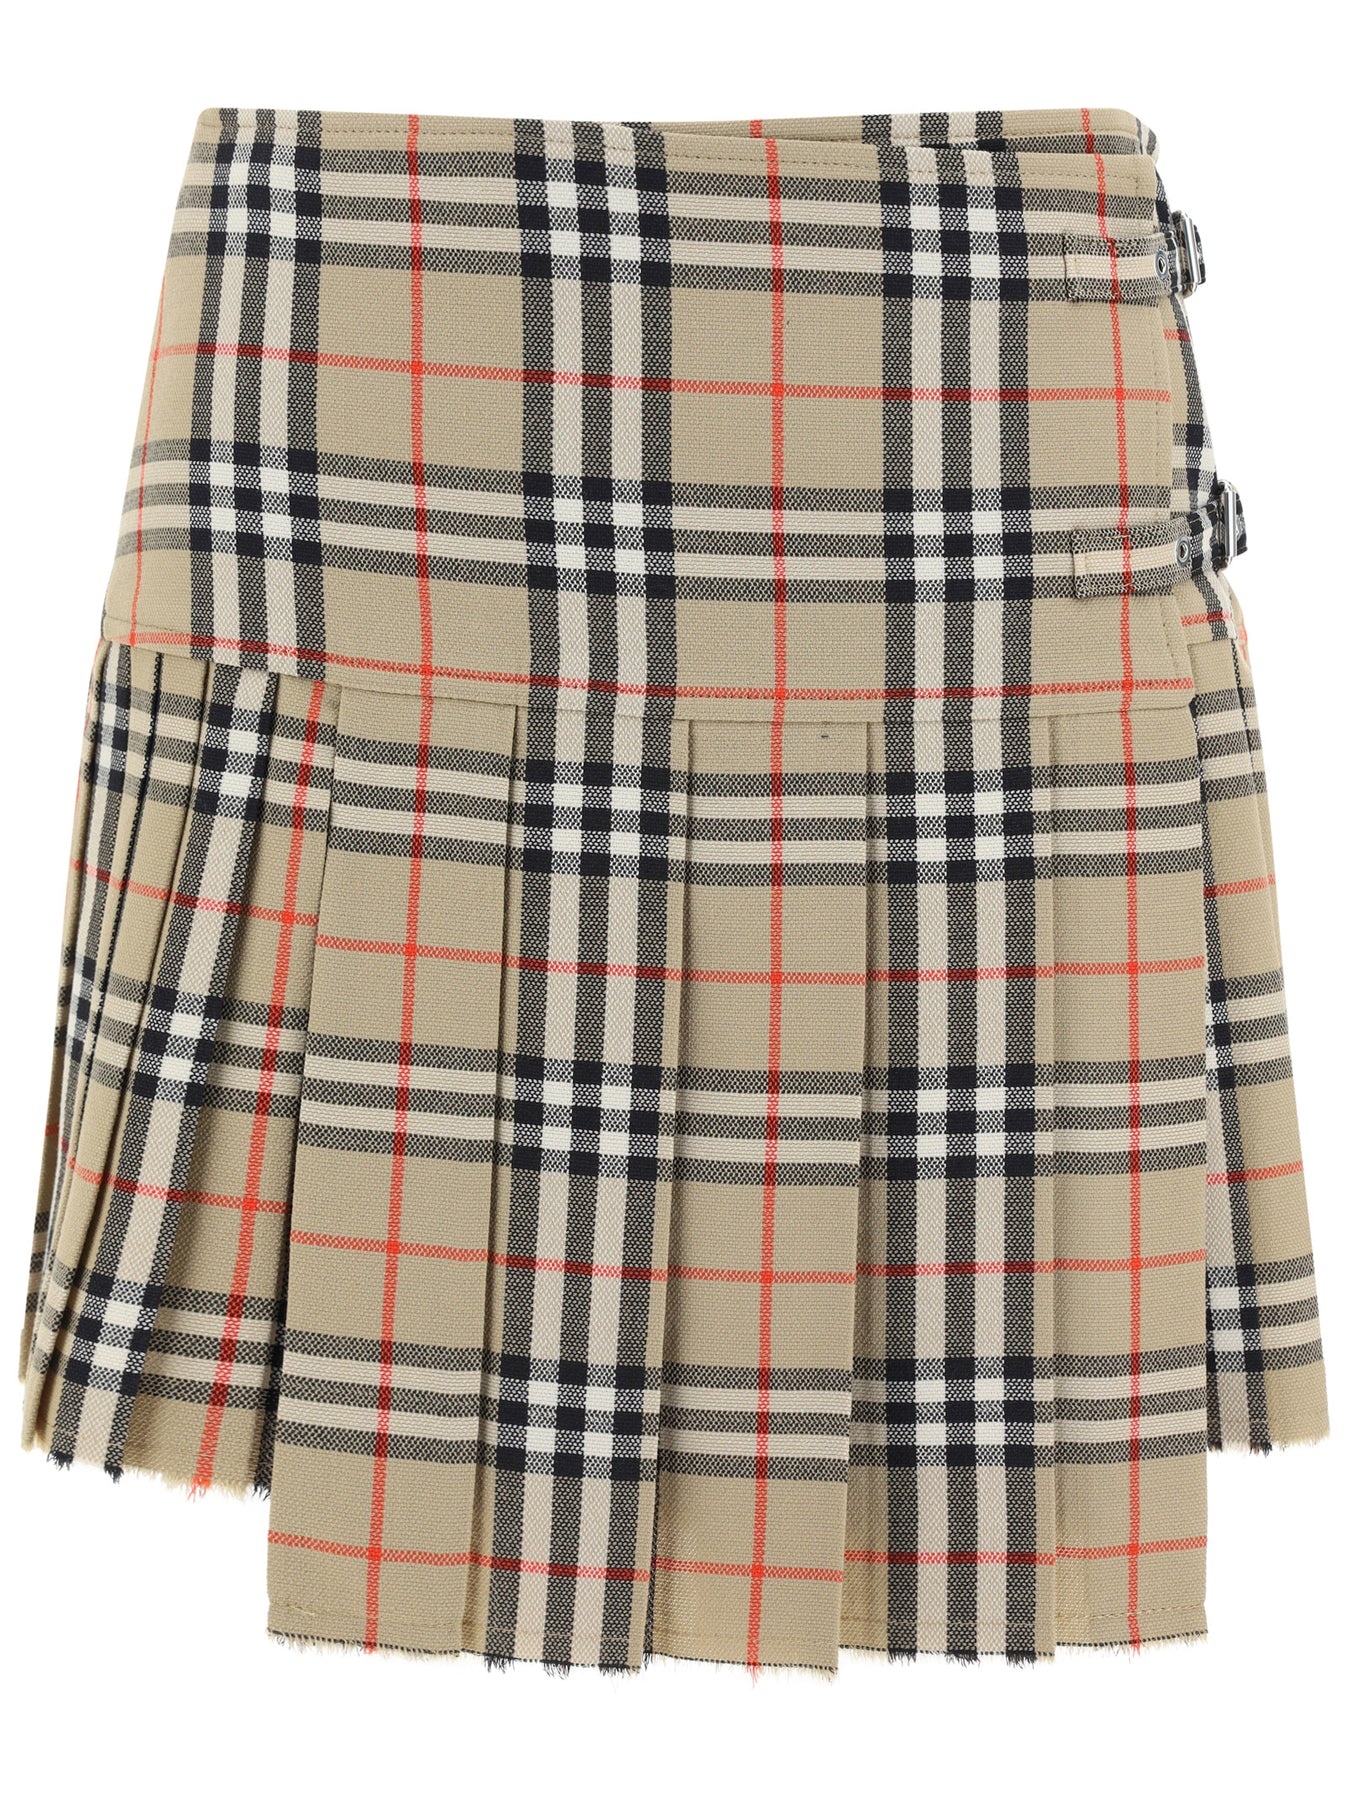 Wool skirt with iconic print - 1